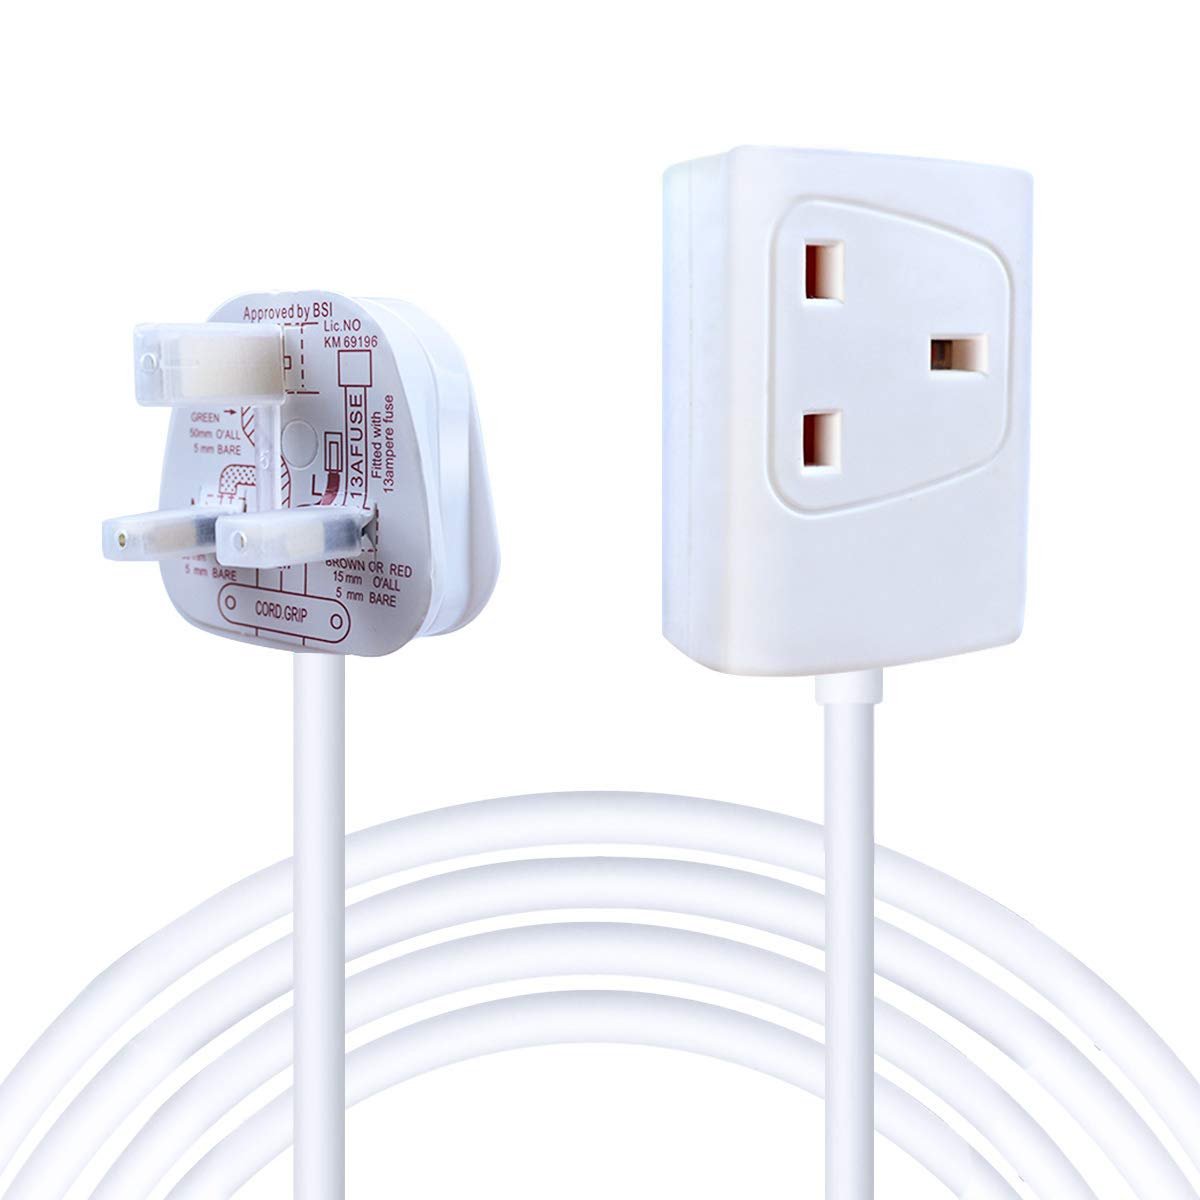 ExtraStar 1 Way Gang Single Socket Mains Power Extension Lead 13A UK 3Pin Plug - 5 Metre Cable, White